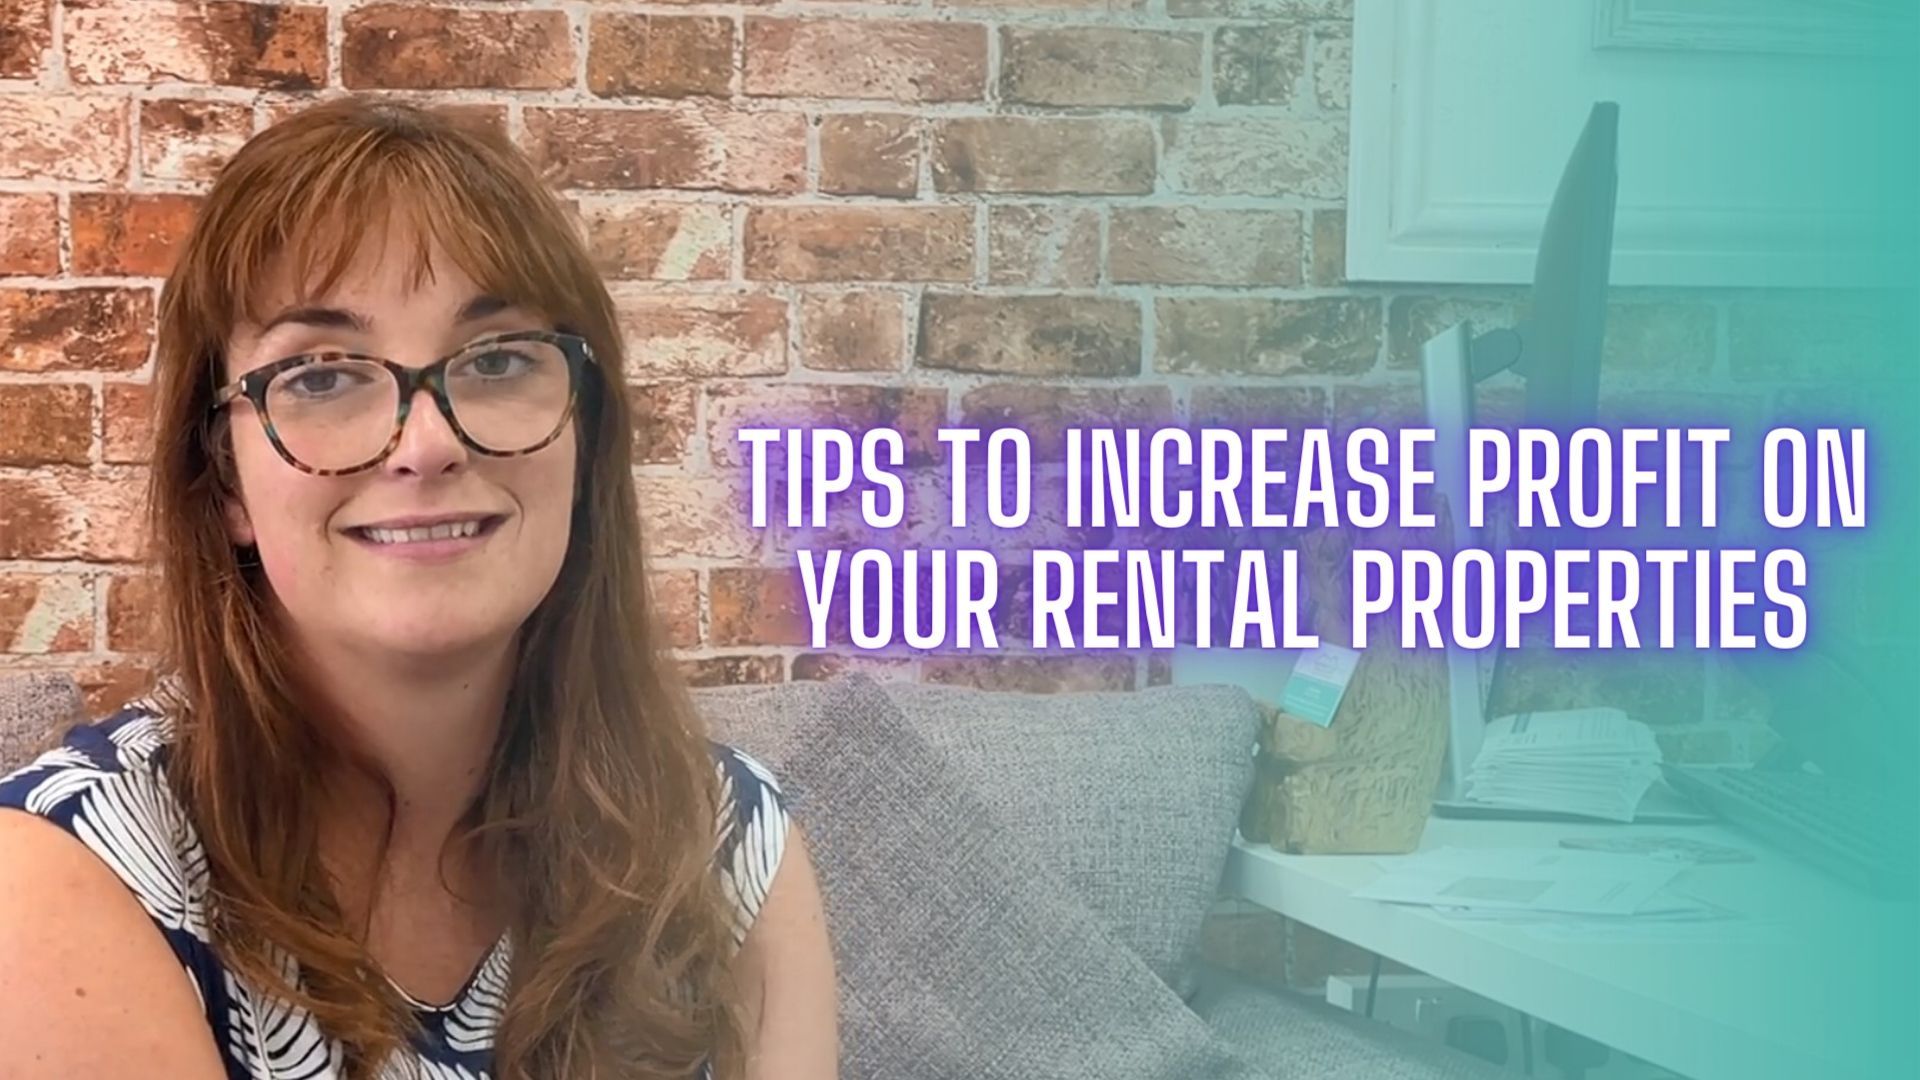 VIDEO: Tips to Increase Profit On Your Rental Properties